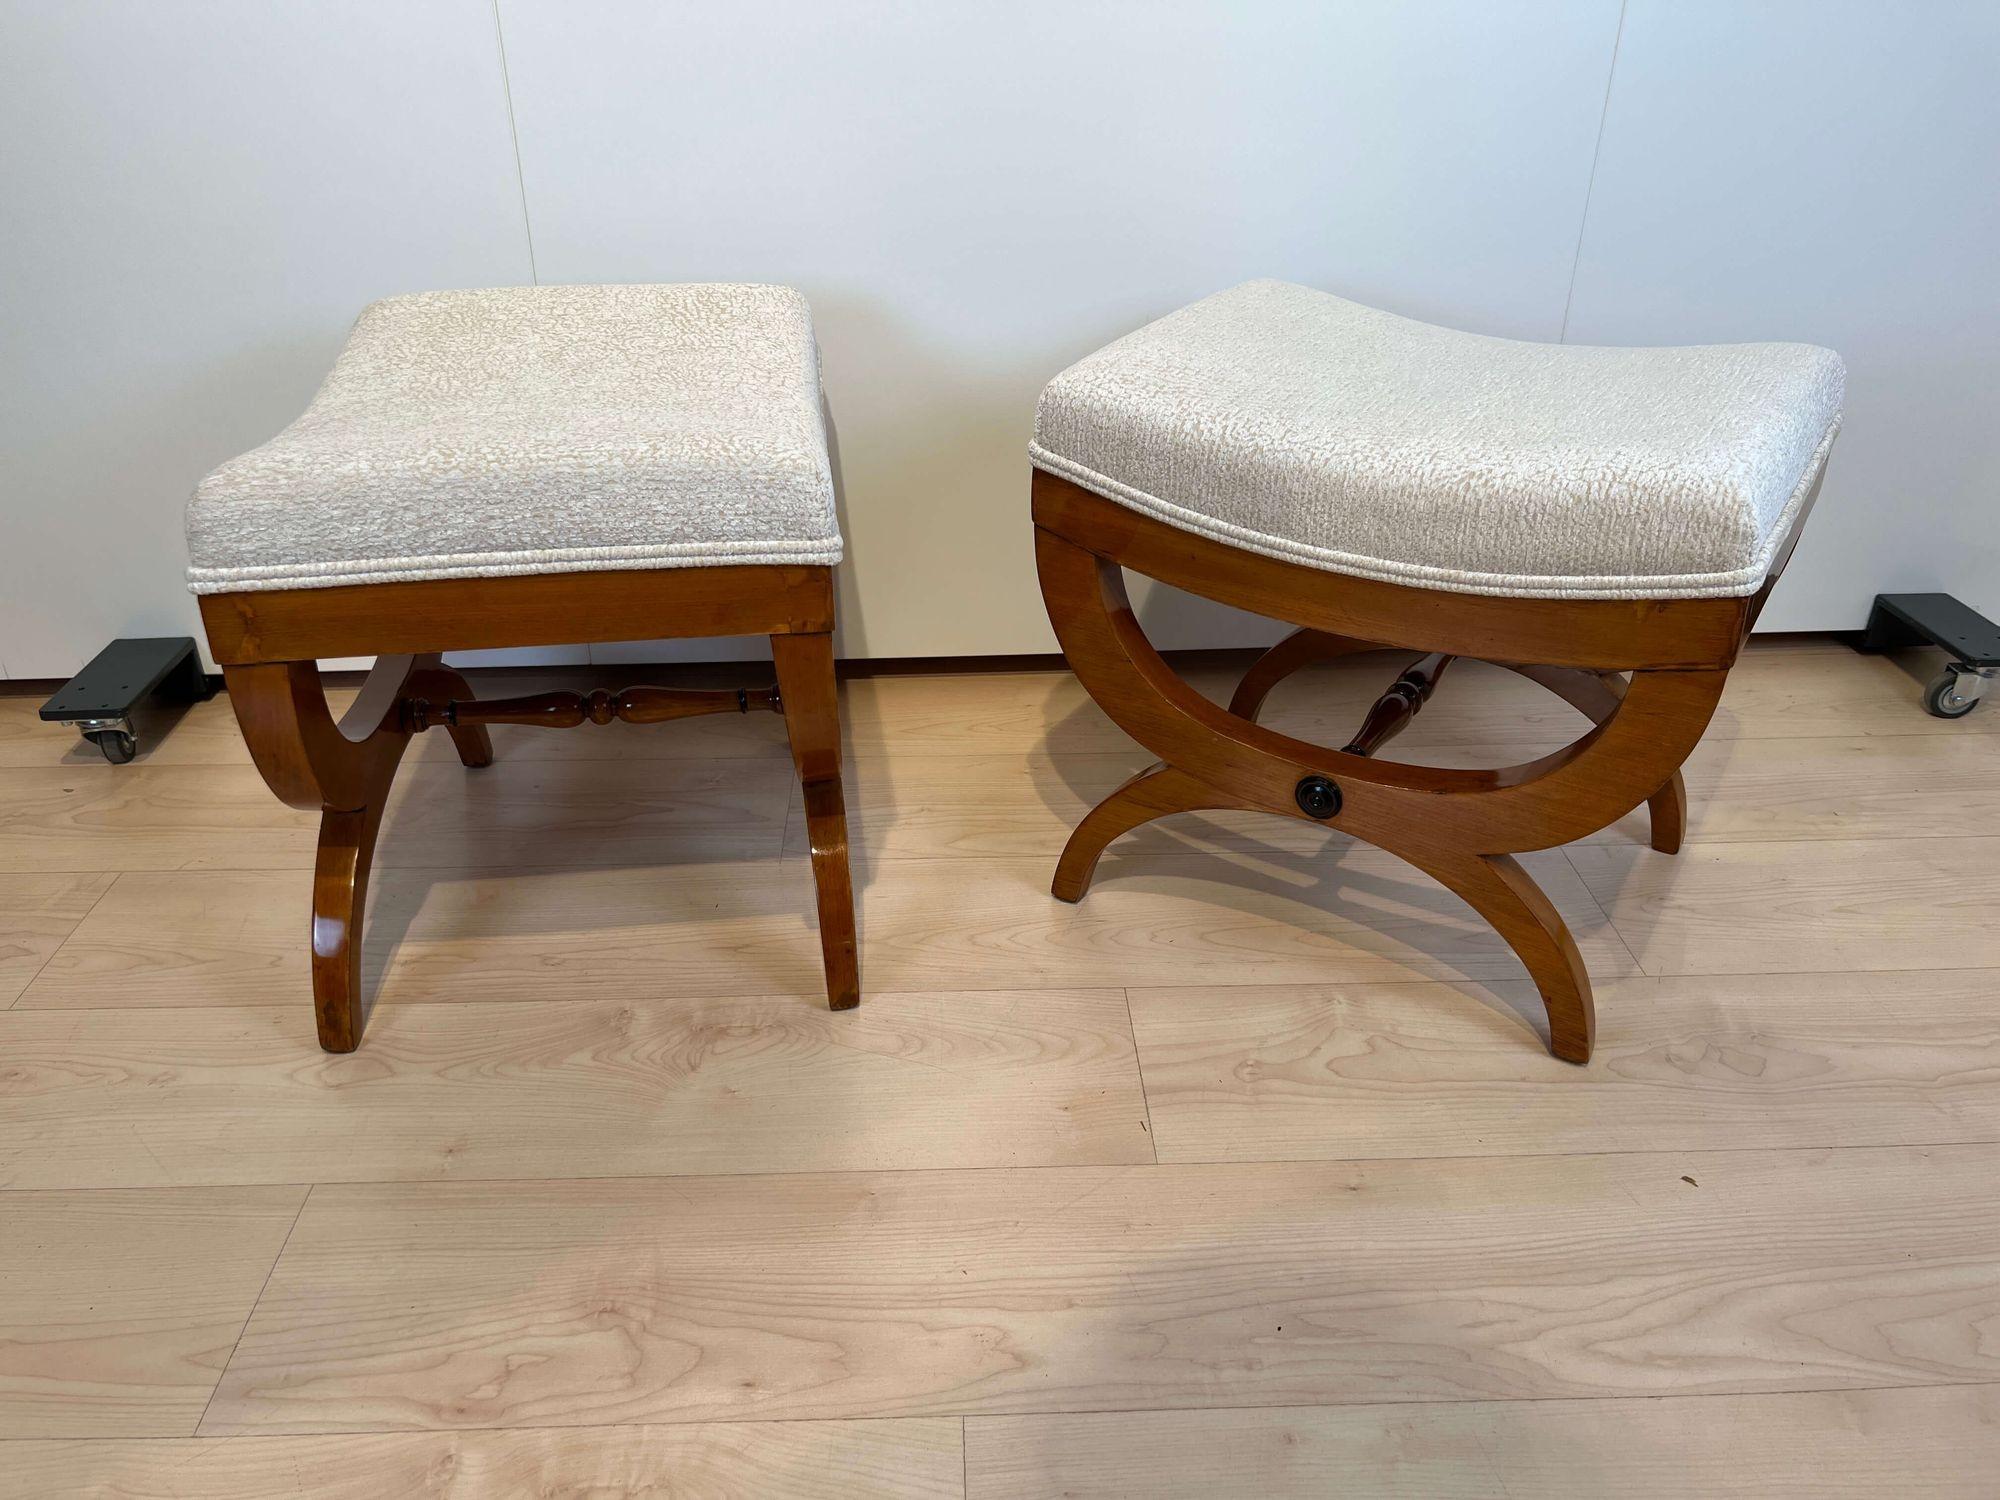 Pair of Large Tabourets, Beech Wood, France, circa 1860 For Sale 10